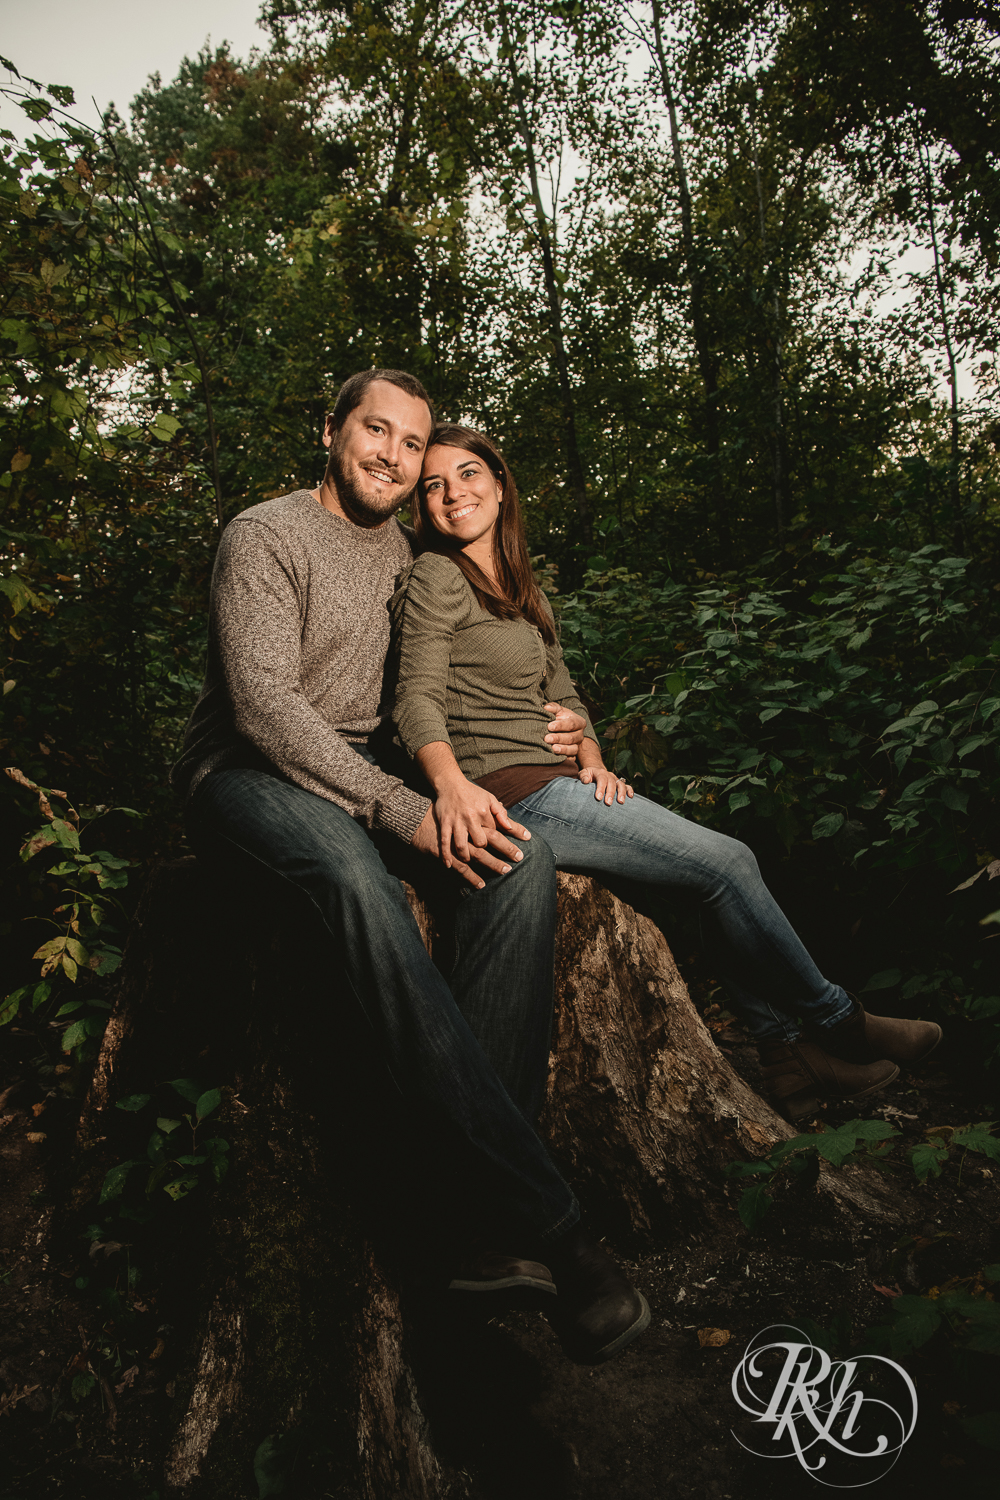 Man and woman in jeans and sweaters smile in woods at Lebanon Hills Regional Park in Eagan, Minnesota.